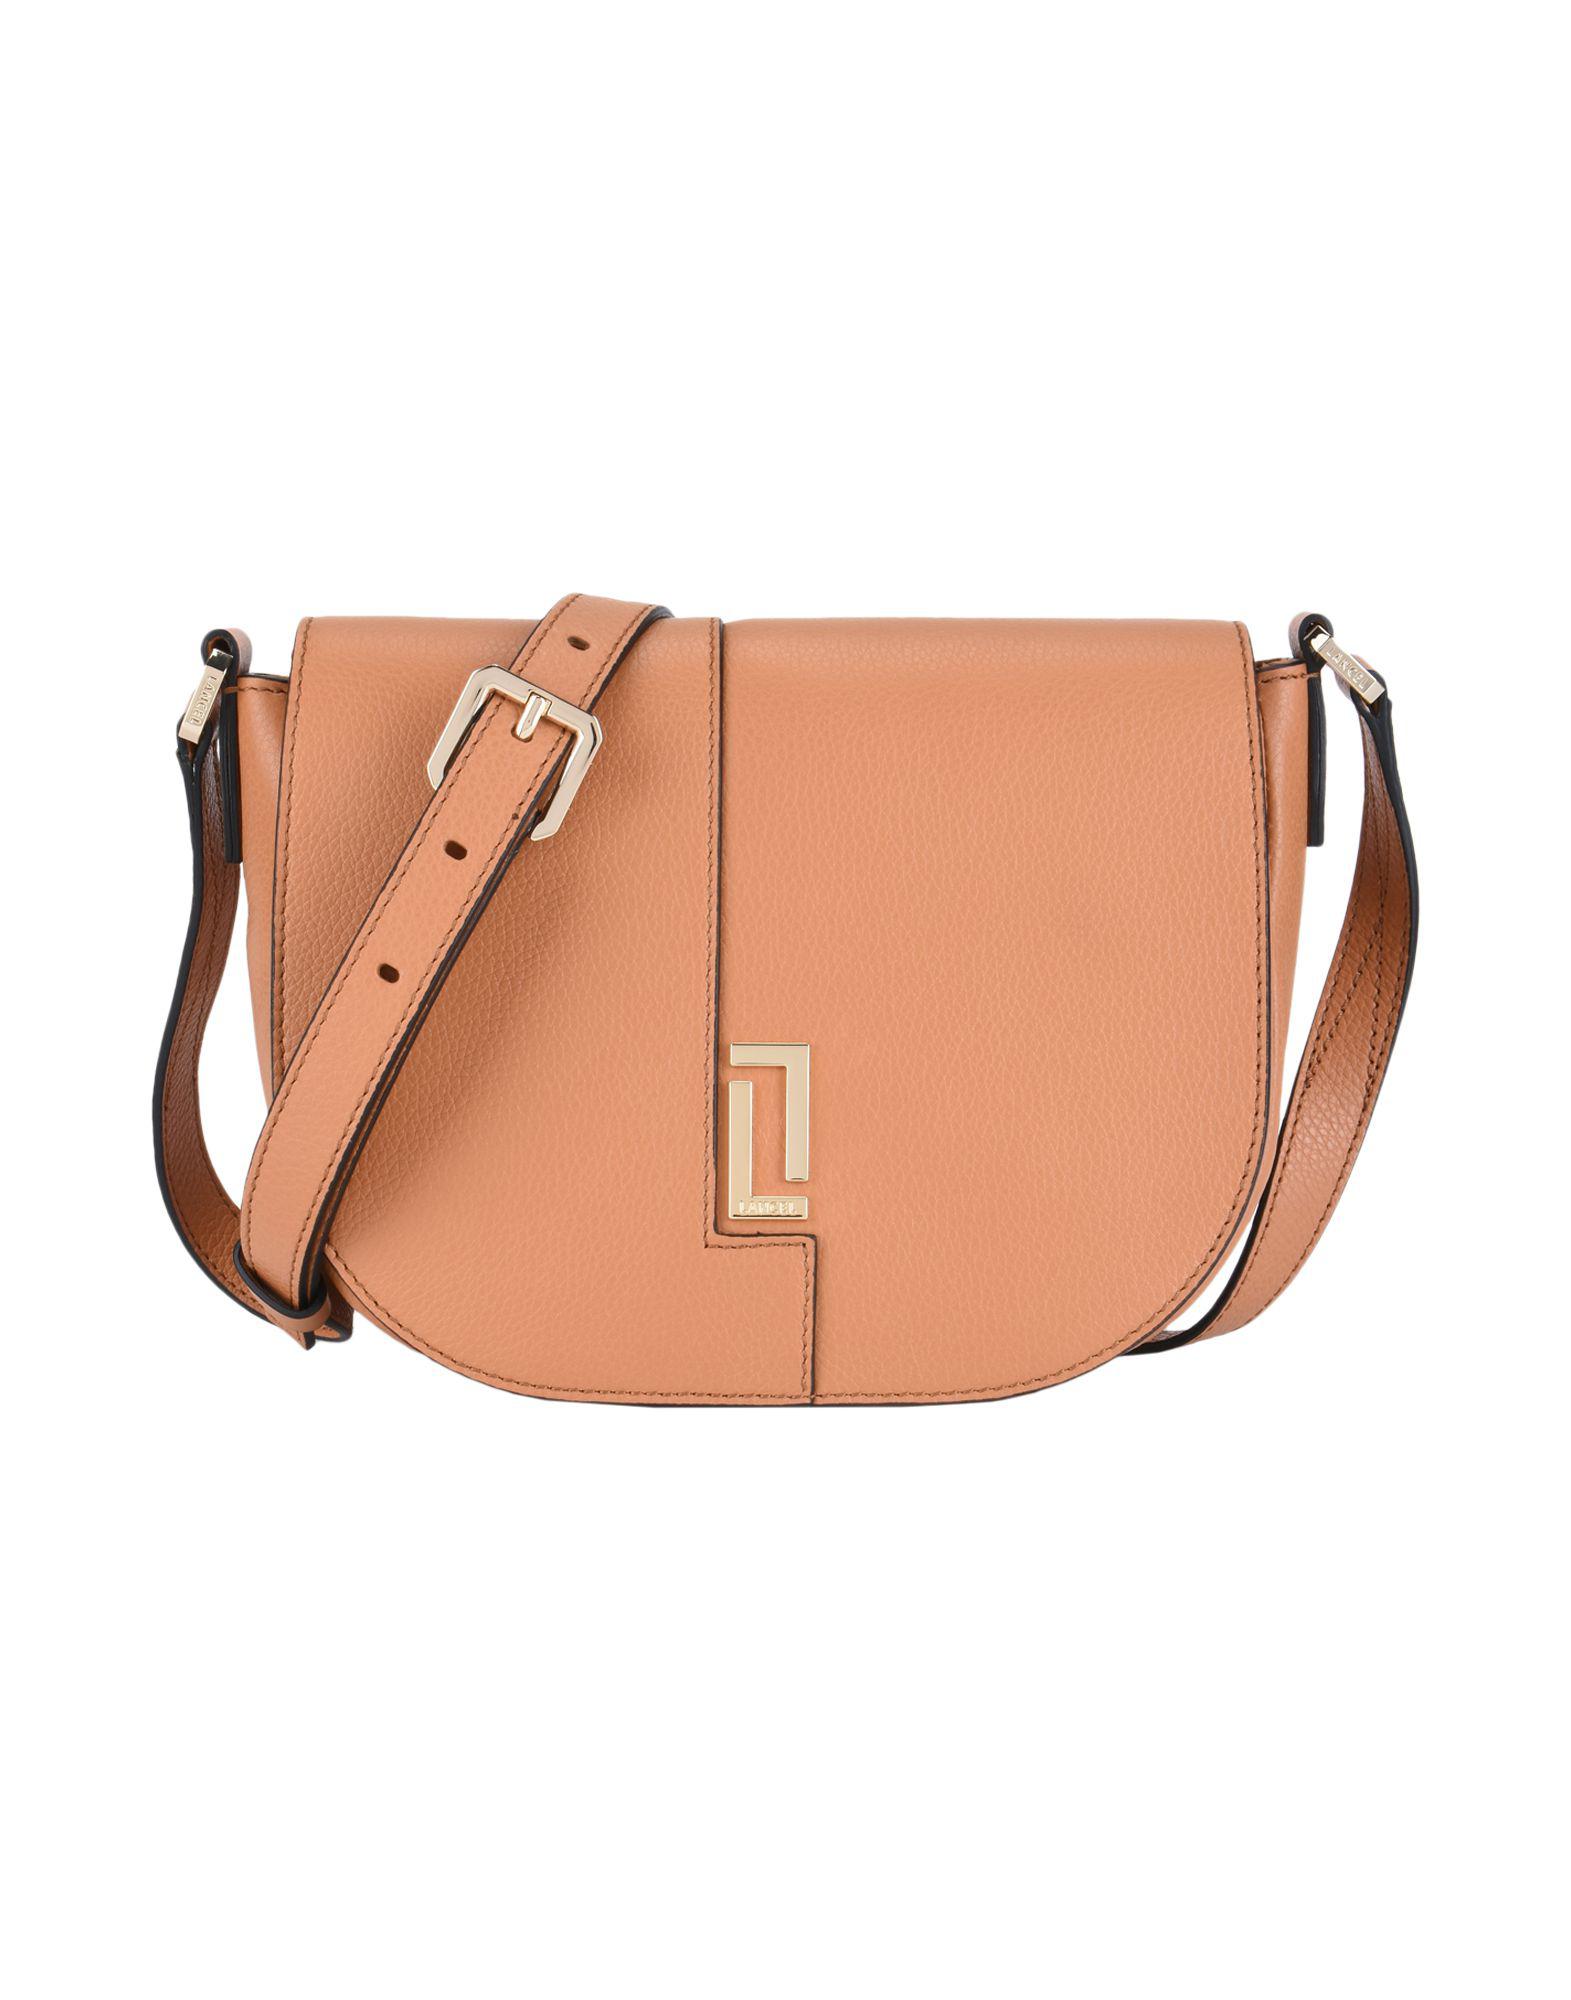 Lancel Leather Cross-body Bag in Camel (Natural) - Lyst